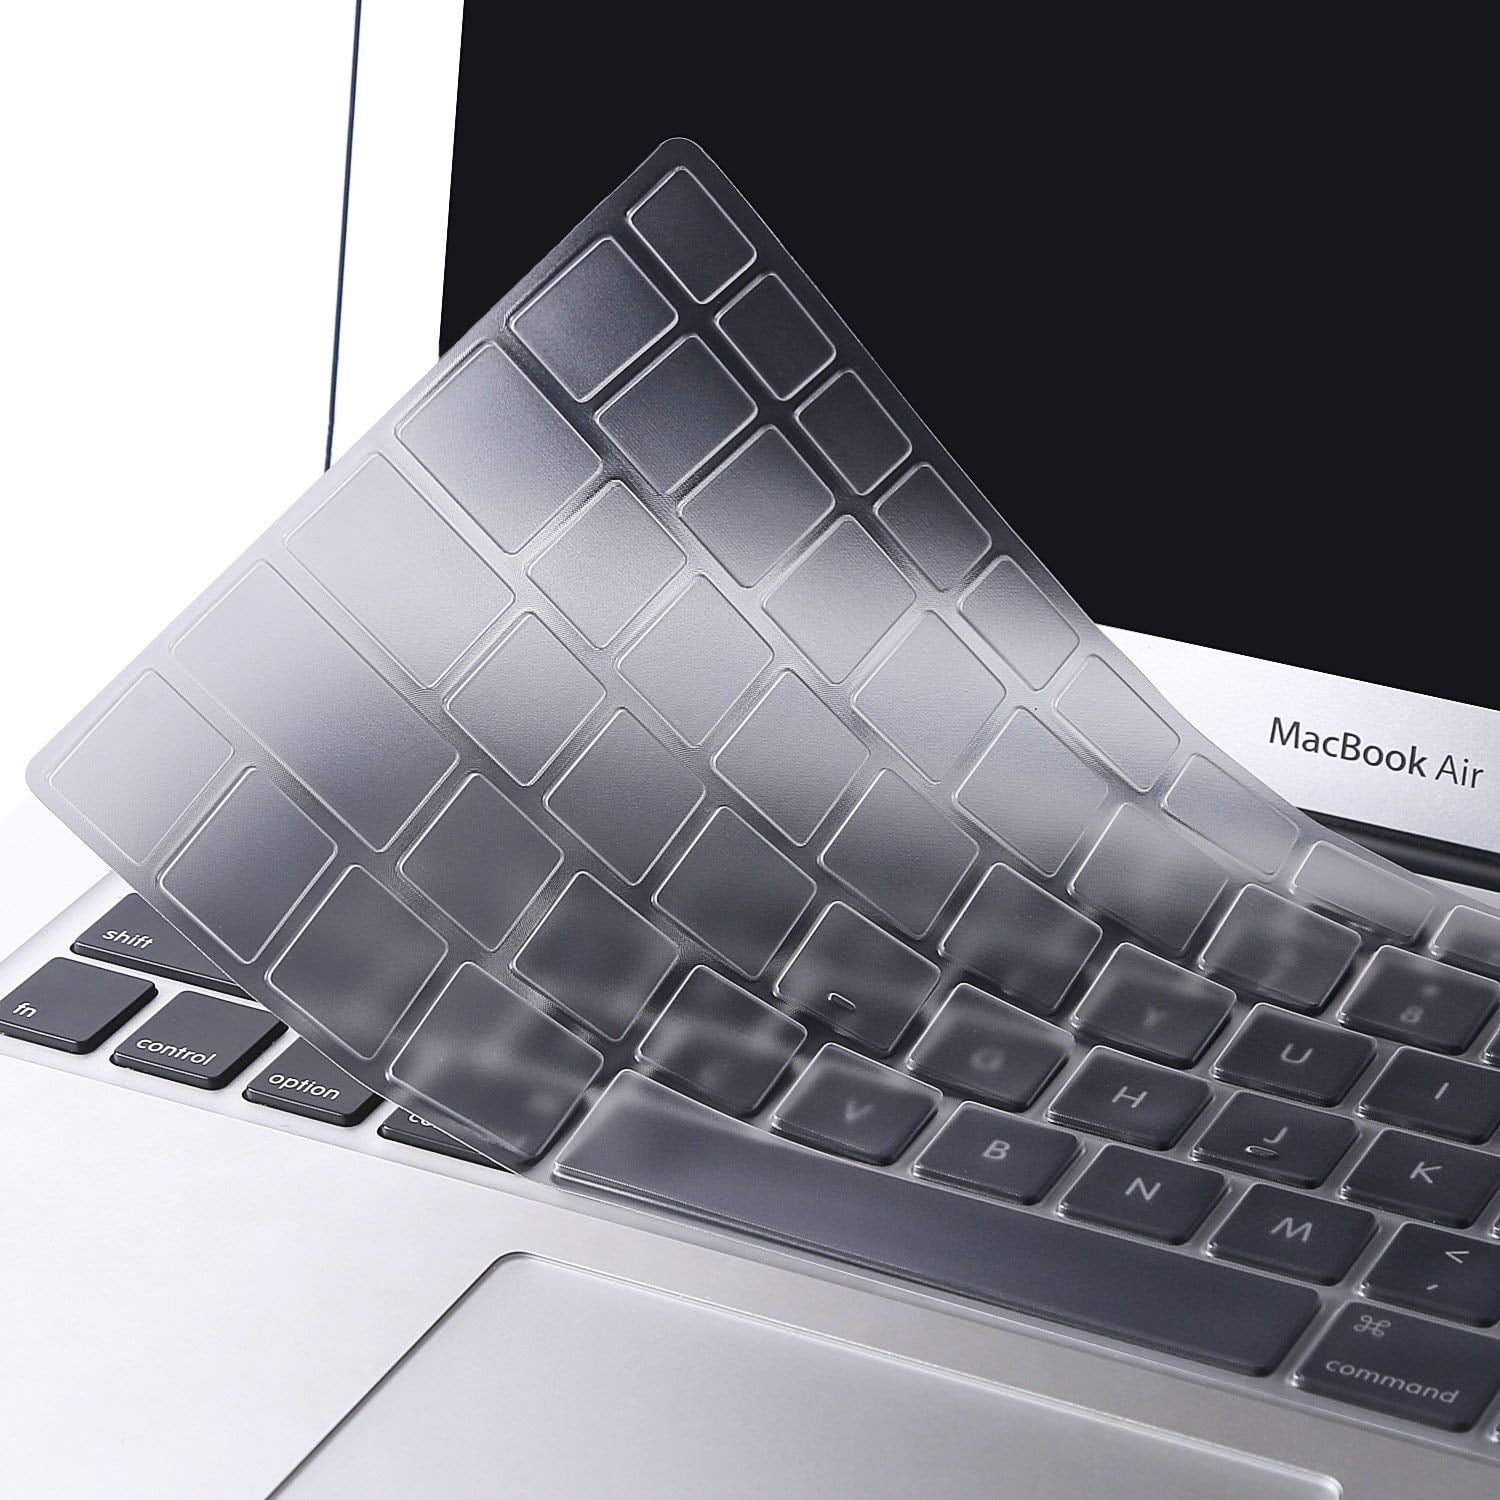 Models: A1370 & A1465 Clear MOSISO Protective Keyboard Cover Skin Compatible with MacBook Air 11 inch 